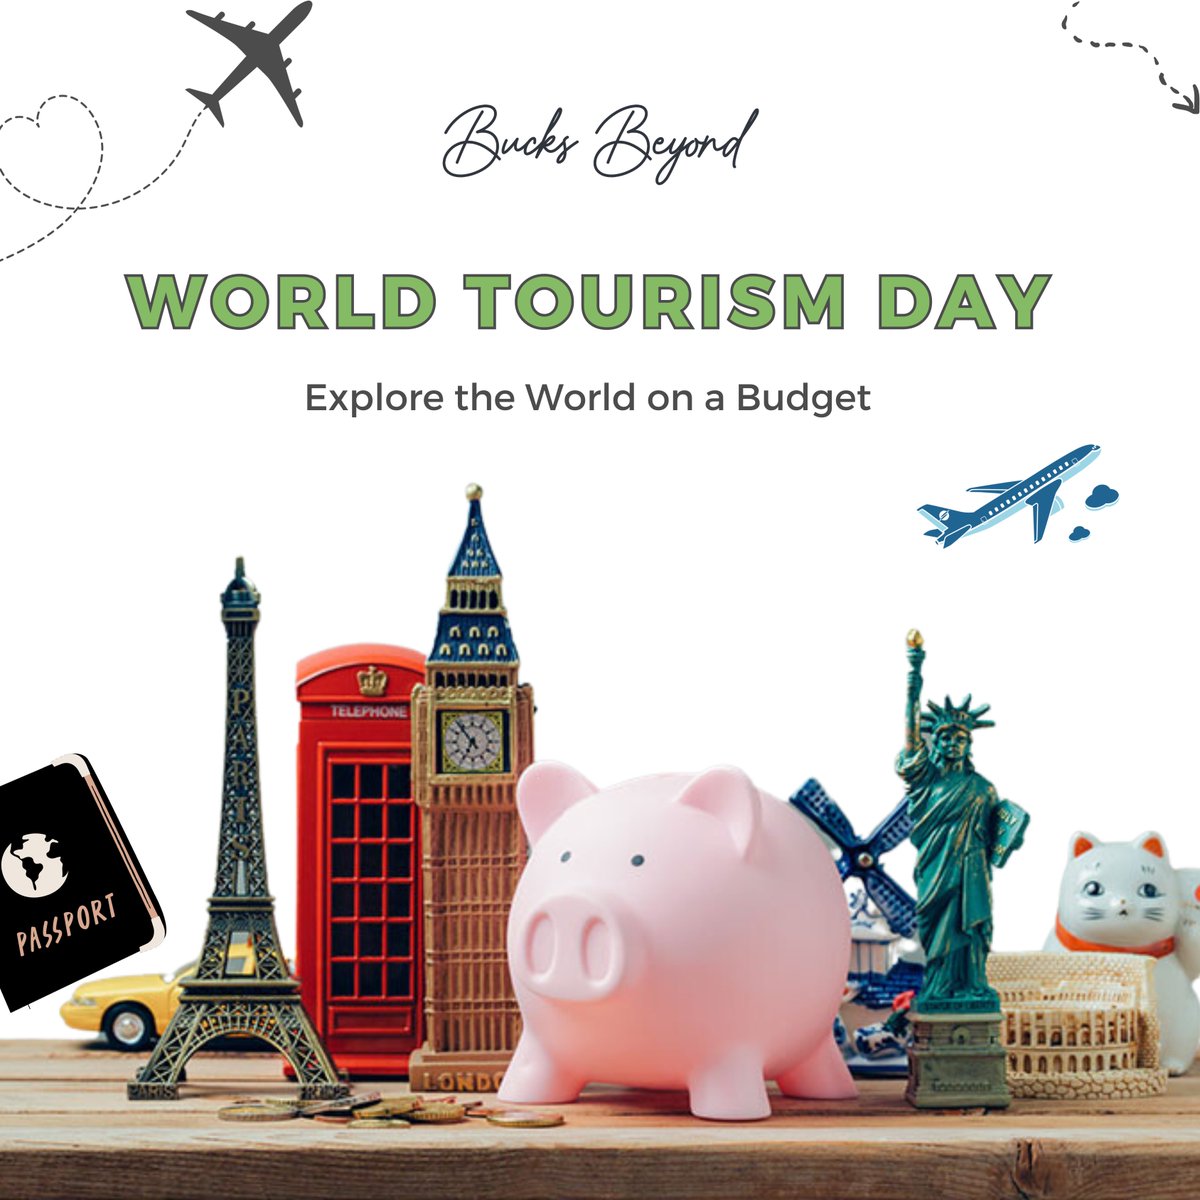 Discover amazing destinations without breaking the bank. Plan your budget-friendly adventures this World Tourism Day!

#bucksbeyond #worldtourismday #travel #budgettravel #travellover #finance #saveandtravel #tourism #budgetfriendlytravel #budget #travelsavings #smartfinance